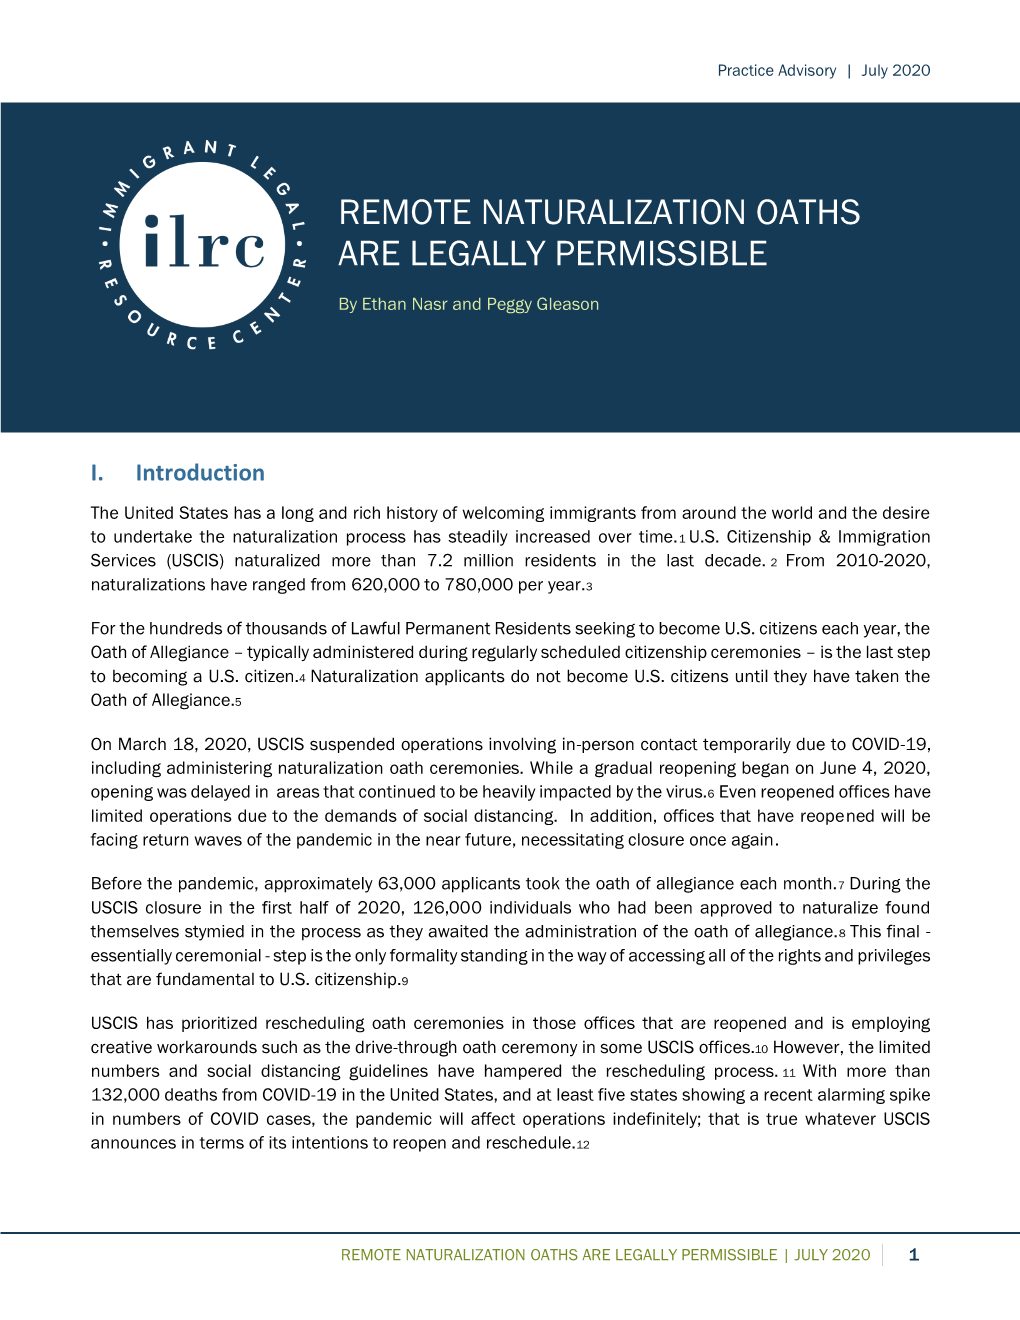 Remote Naturalization Oaths Are Legally Permissible | July 2020 1